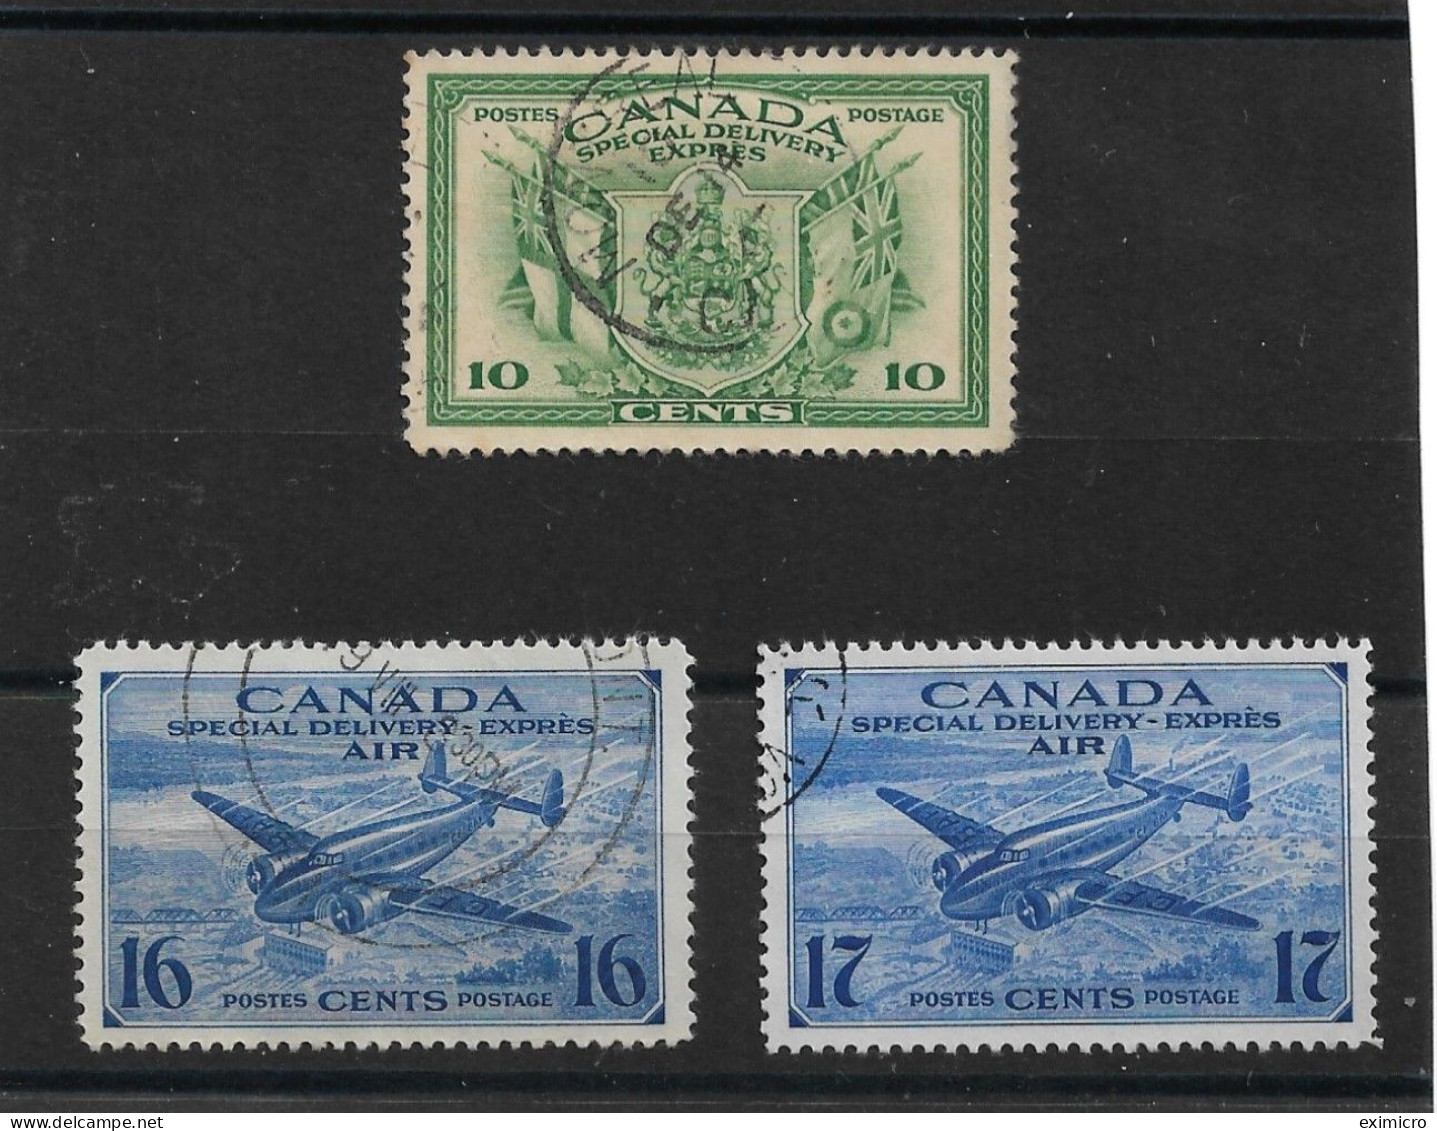 CANADA 1942 - 1943 WAR EFFORT SPECIAL DELIVERY SET SG S12/S14 FINE USED Cat £9 - Special Delivery